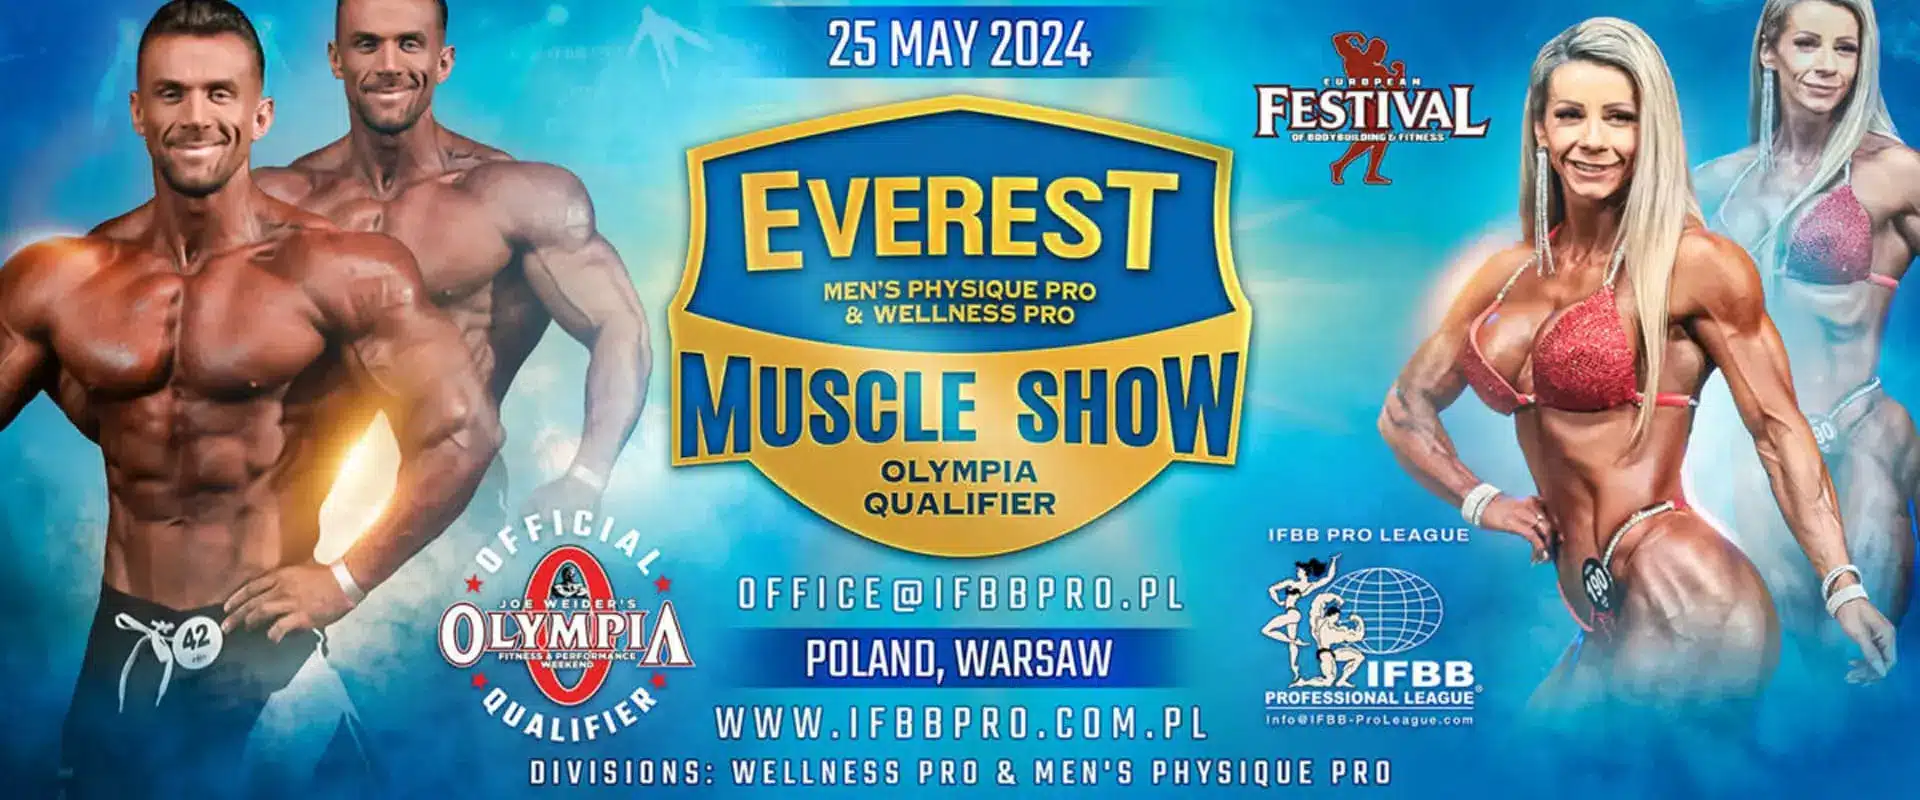 Everest Muscle Show Pro 2024